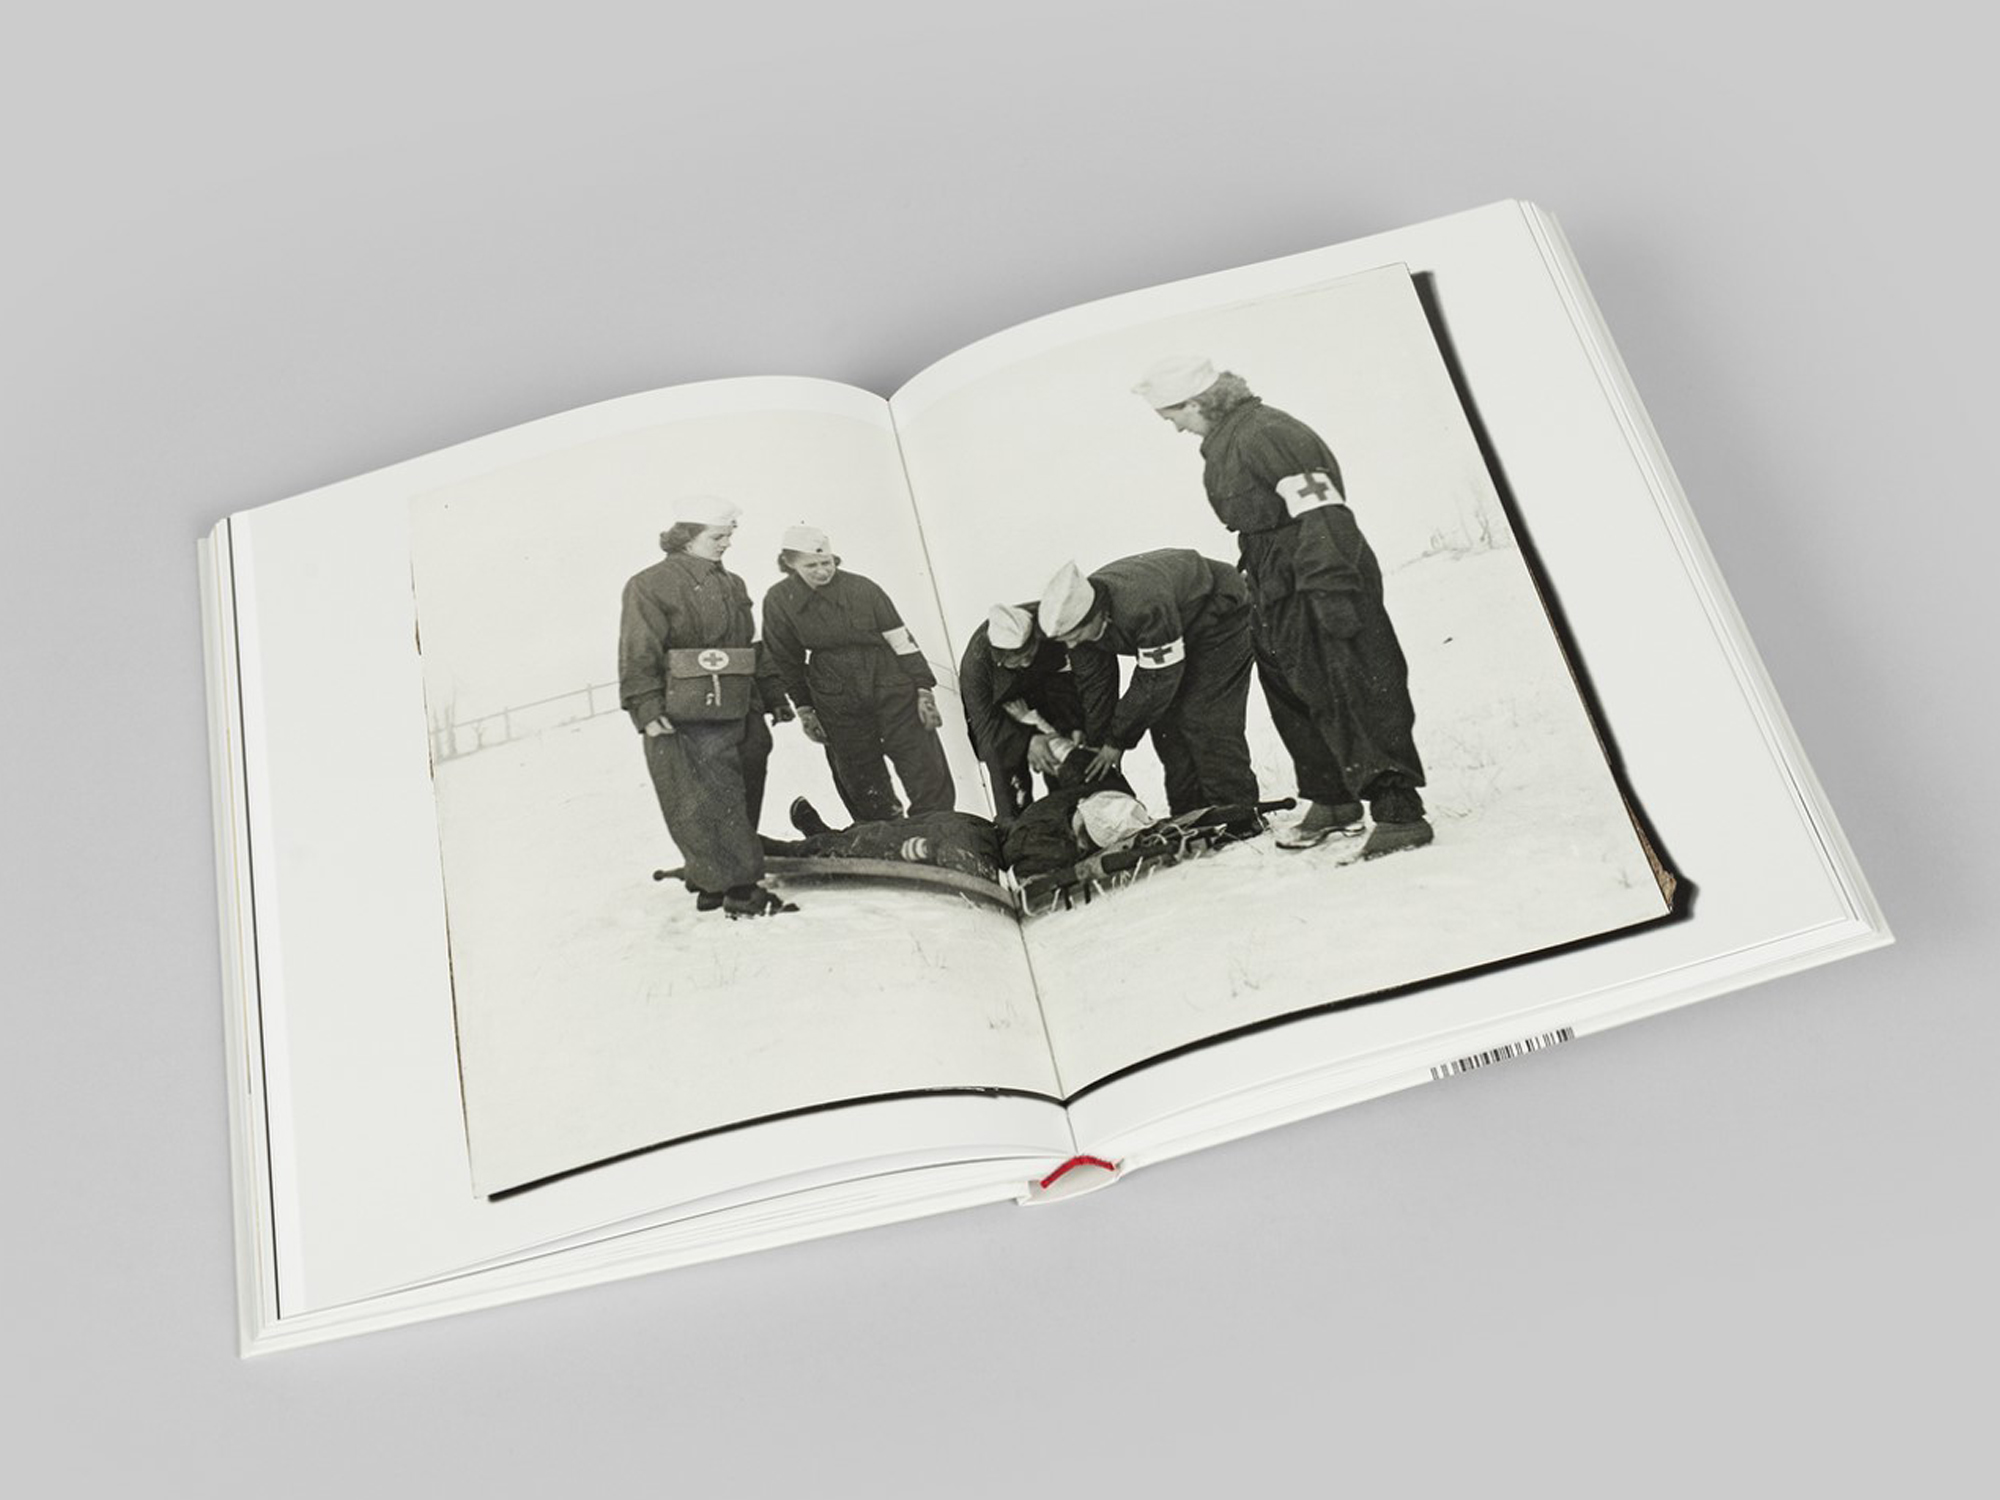 HUMANITY by Henry Leutwyler, published by Steidl